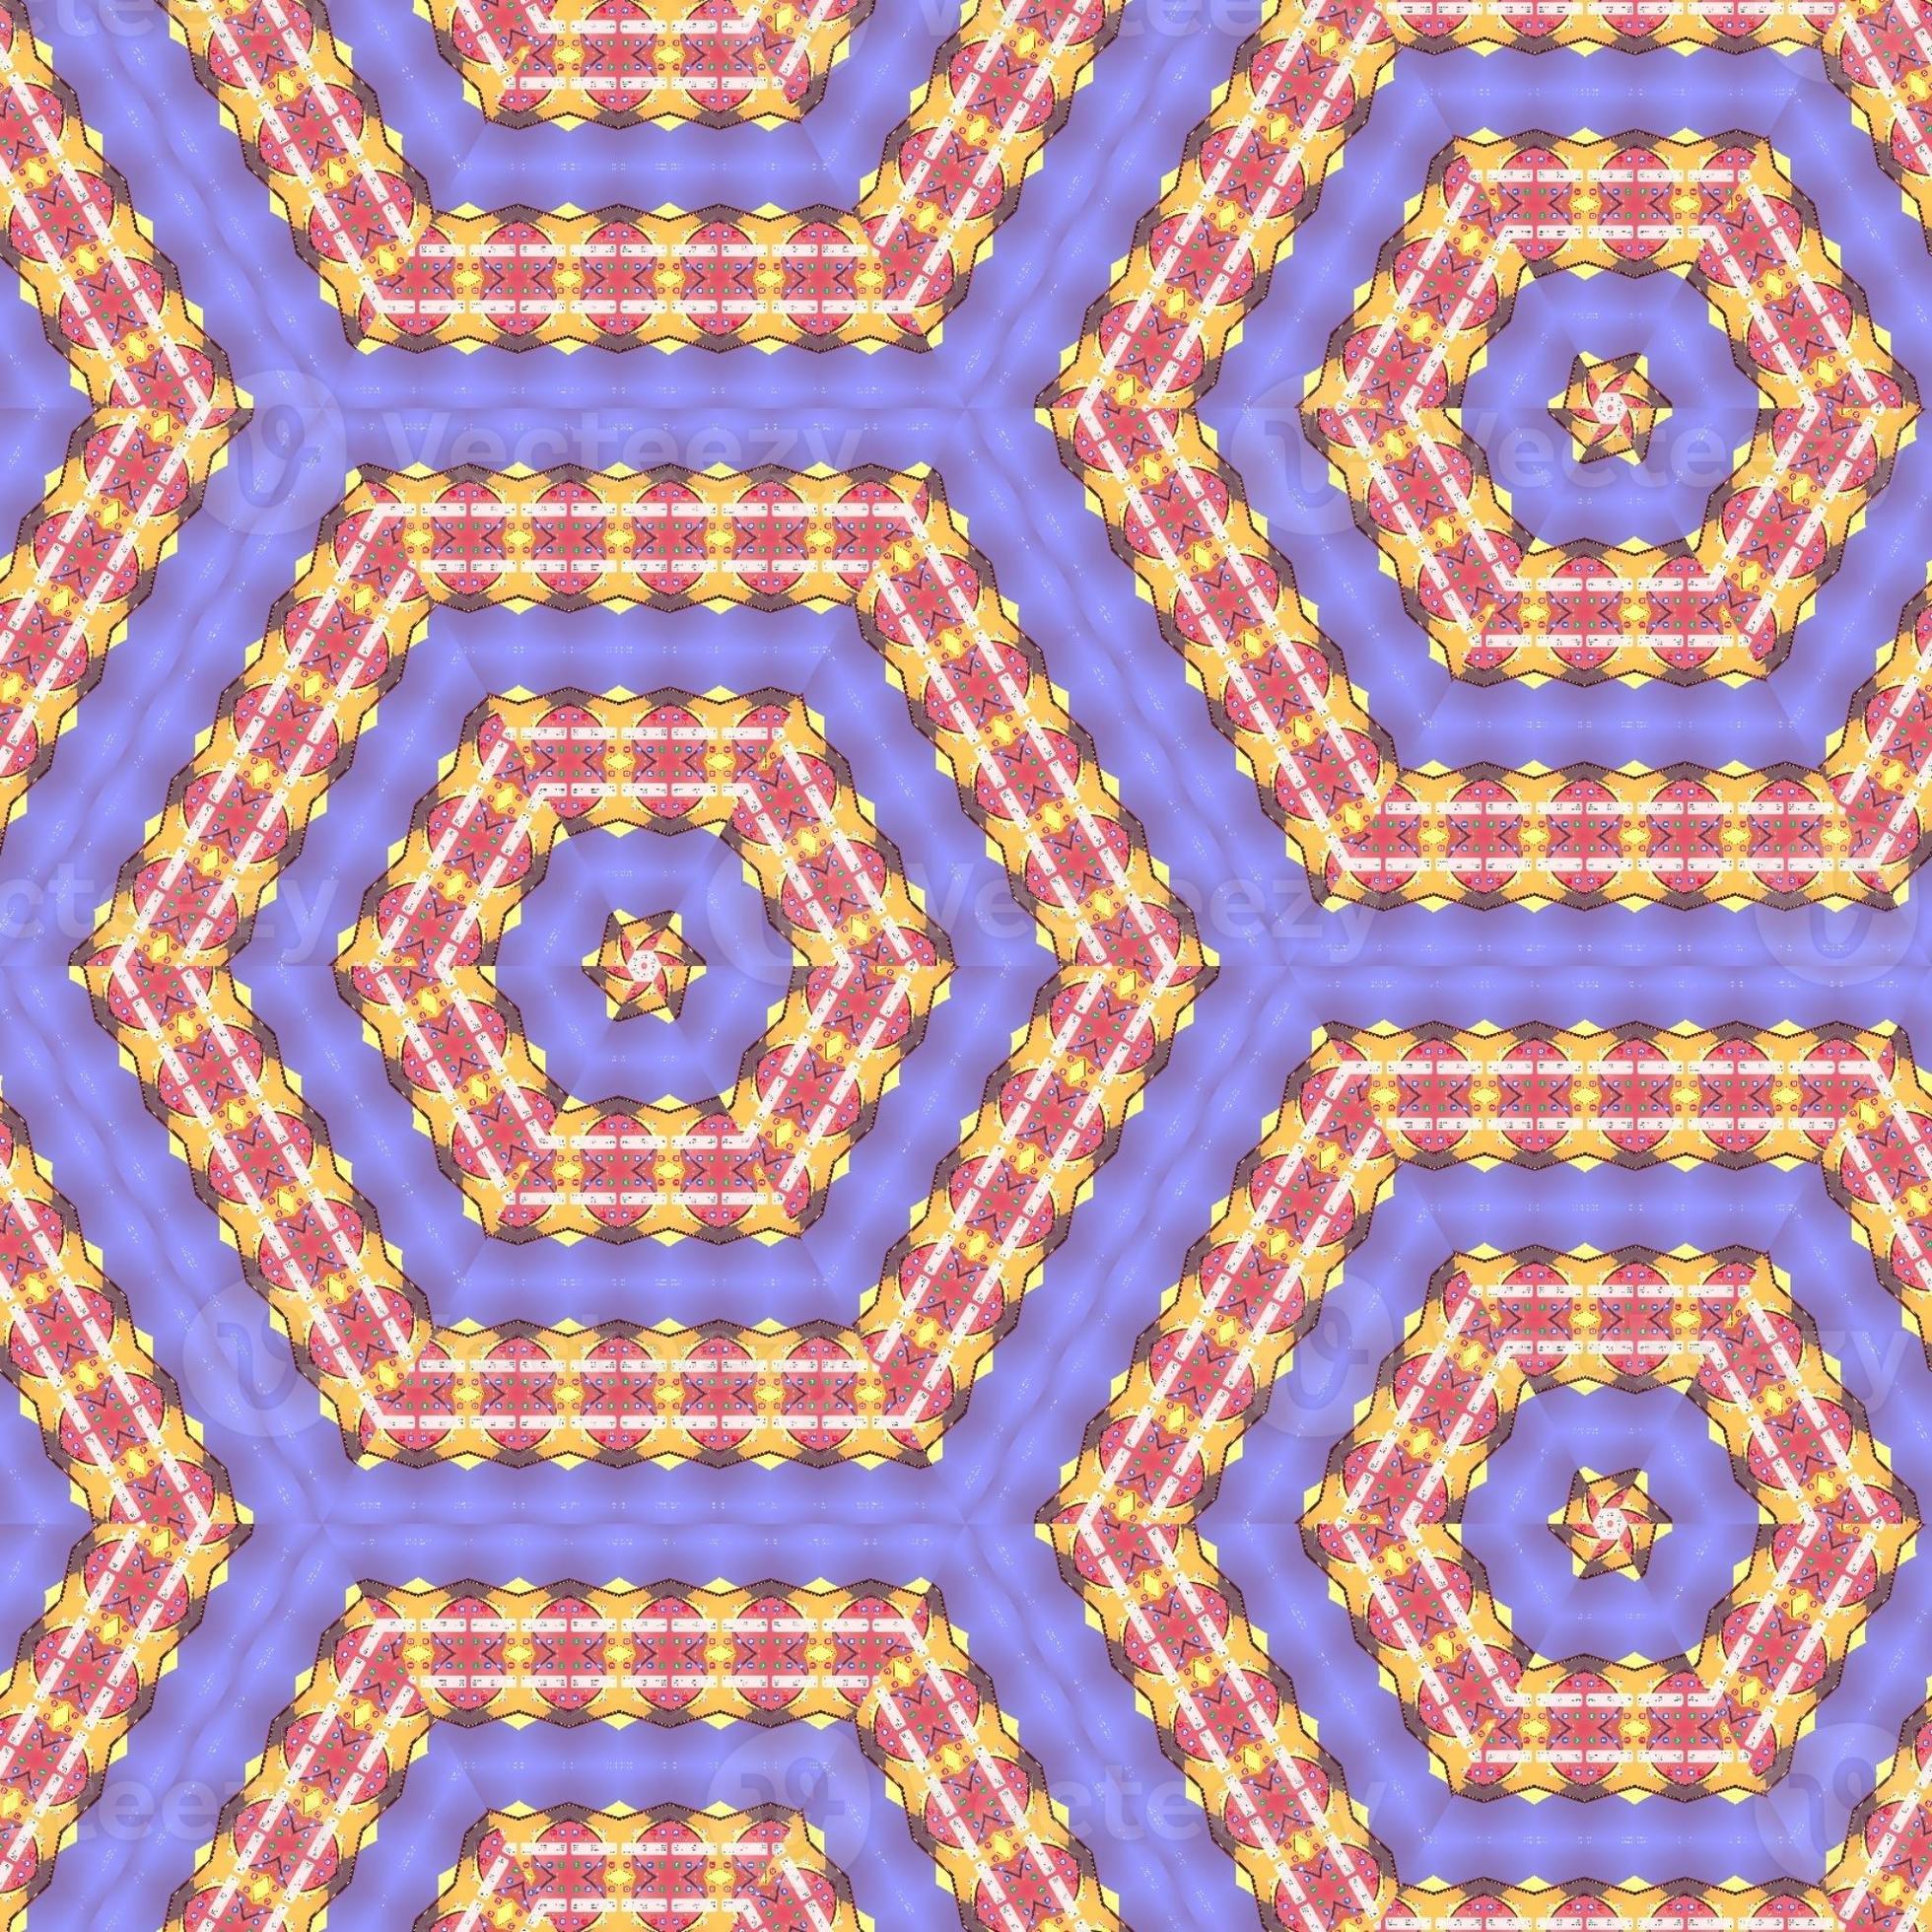 A pattern of hexagons and stars in purple - Trippy